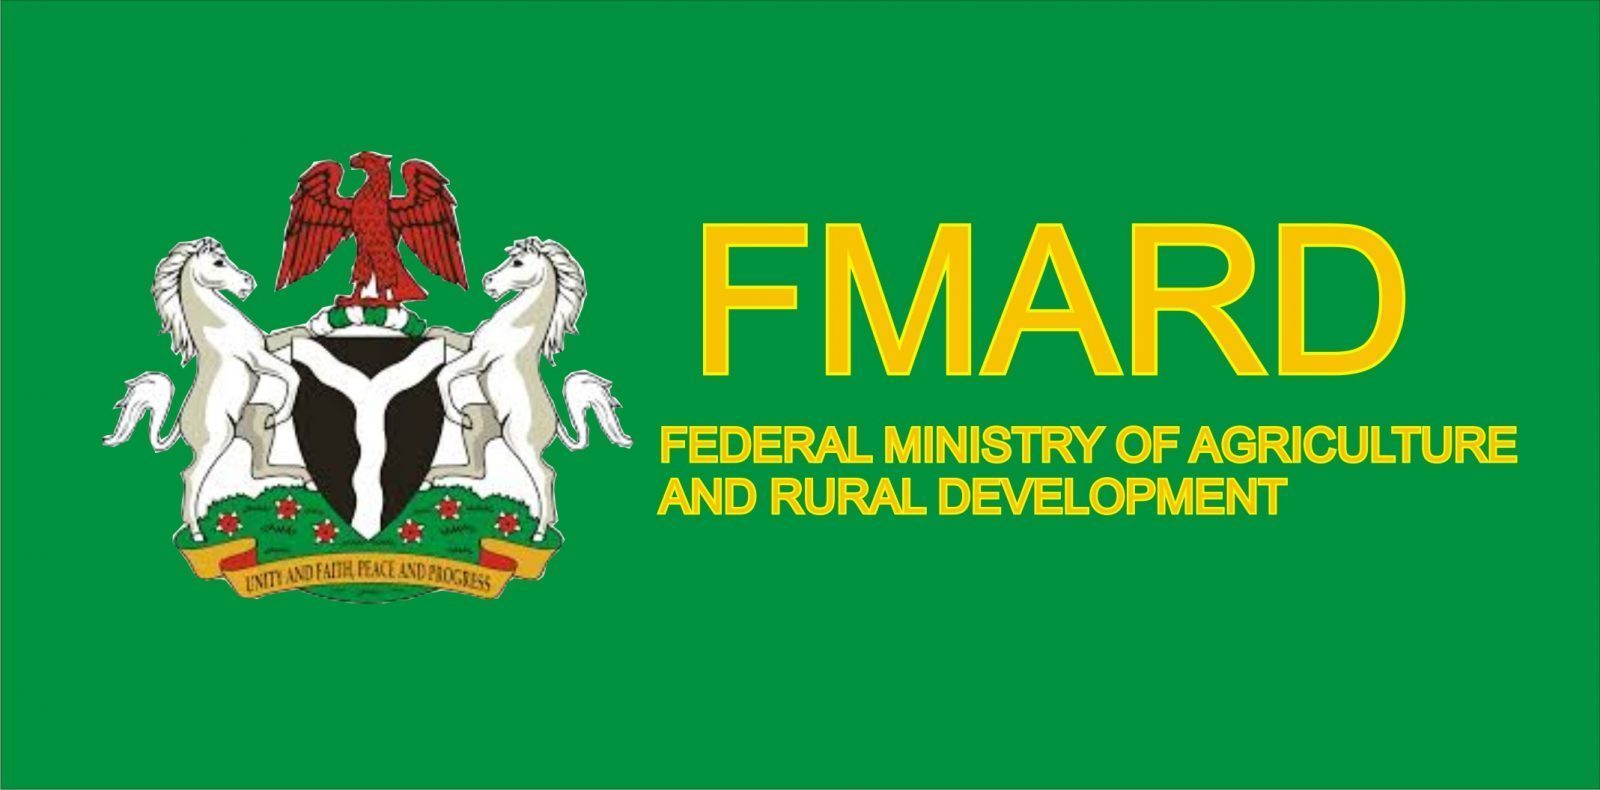 Federal Ministry of Agriculture and Rural Development (FMARD)